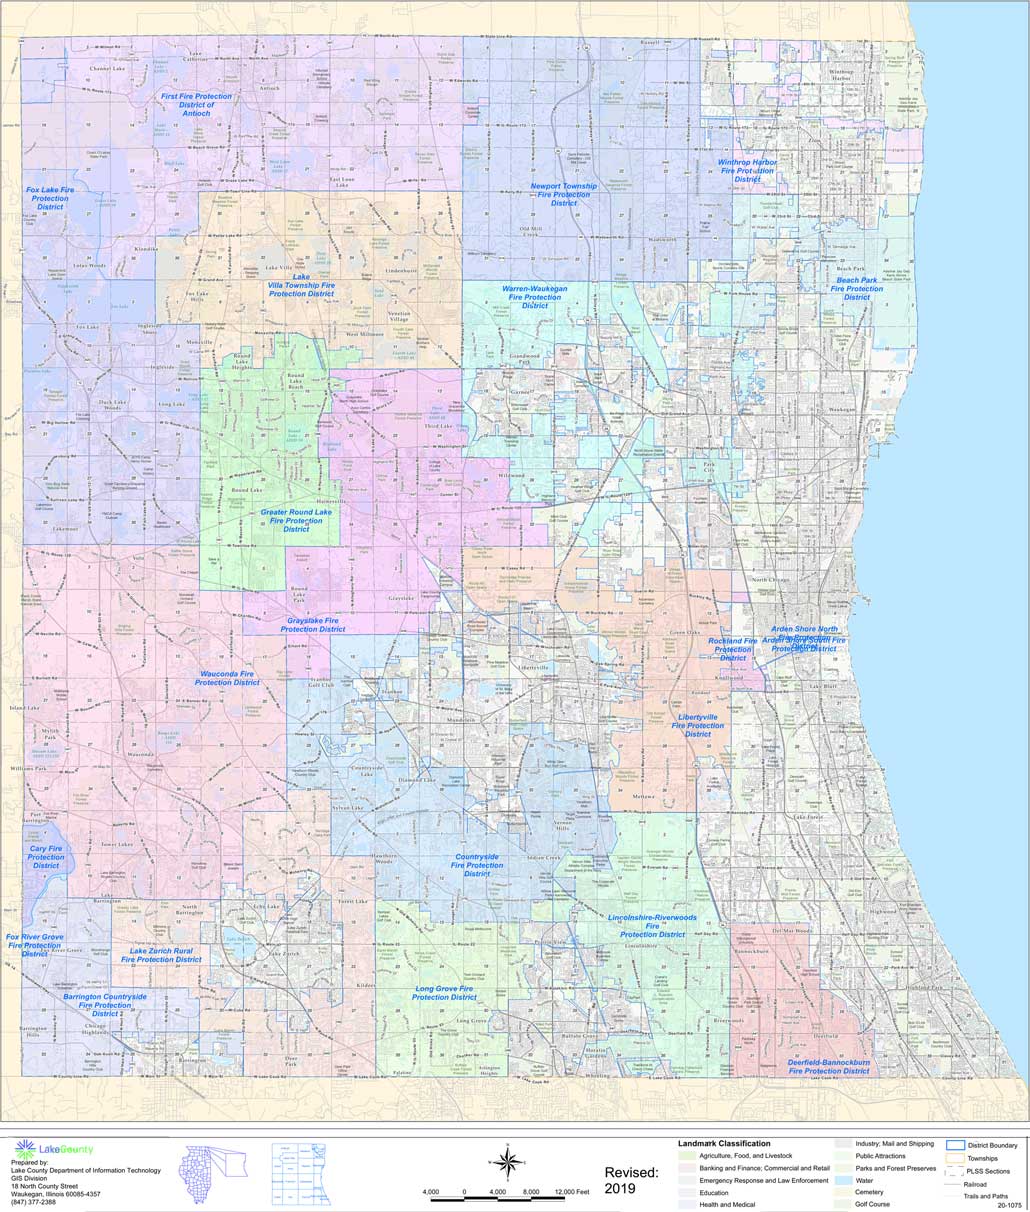 Lake County Fire Protection Districts 2019 (1030px wide, Source: Lake County)